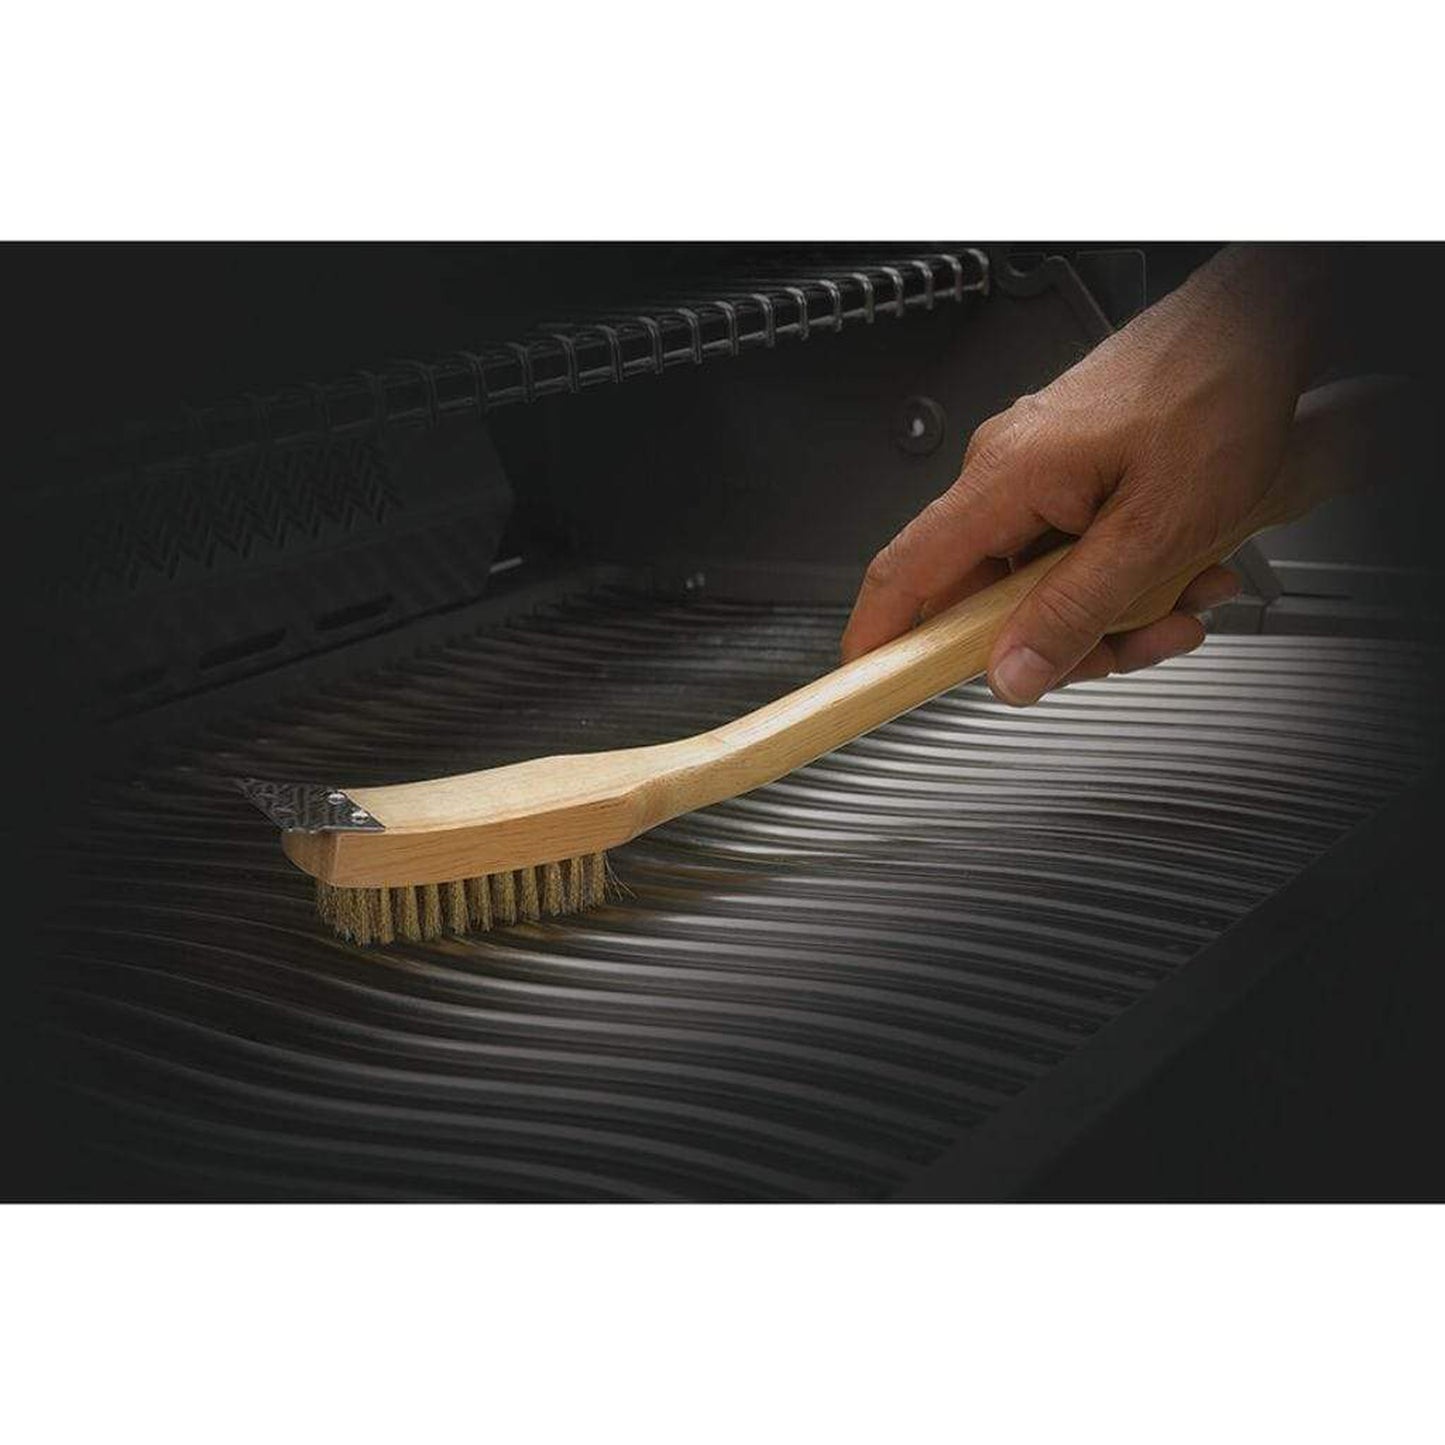 Napoleon 62118 - GRILL BRUSH with Stainless Steel Bristles